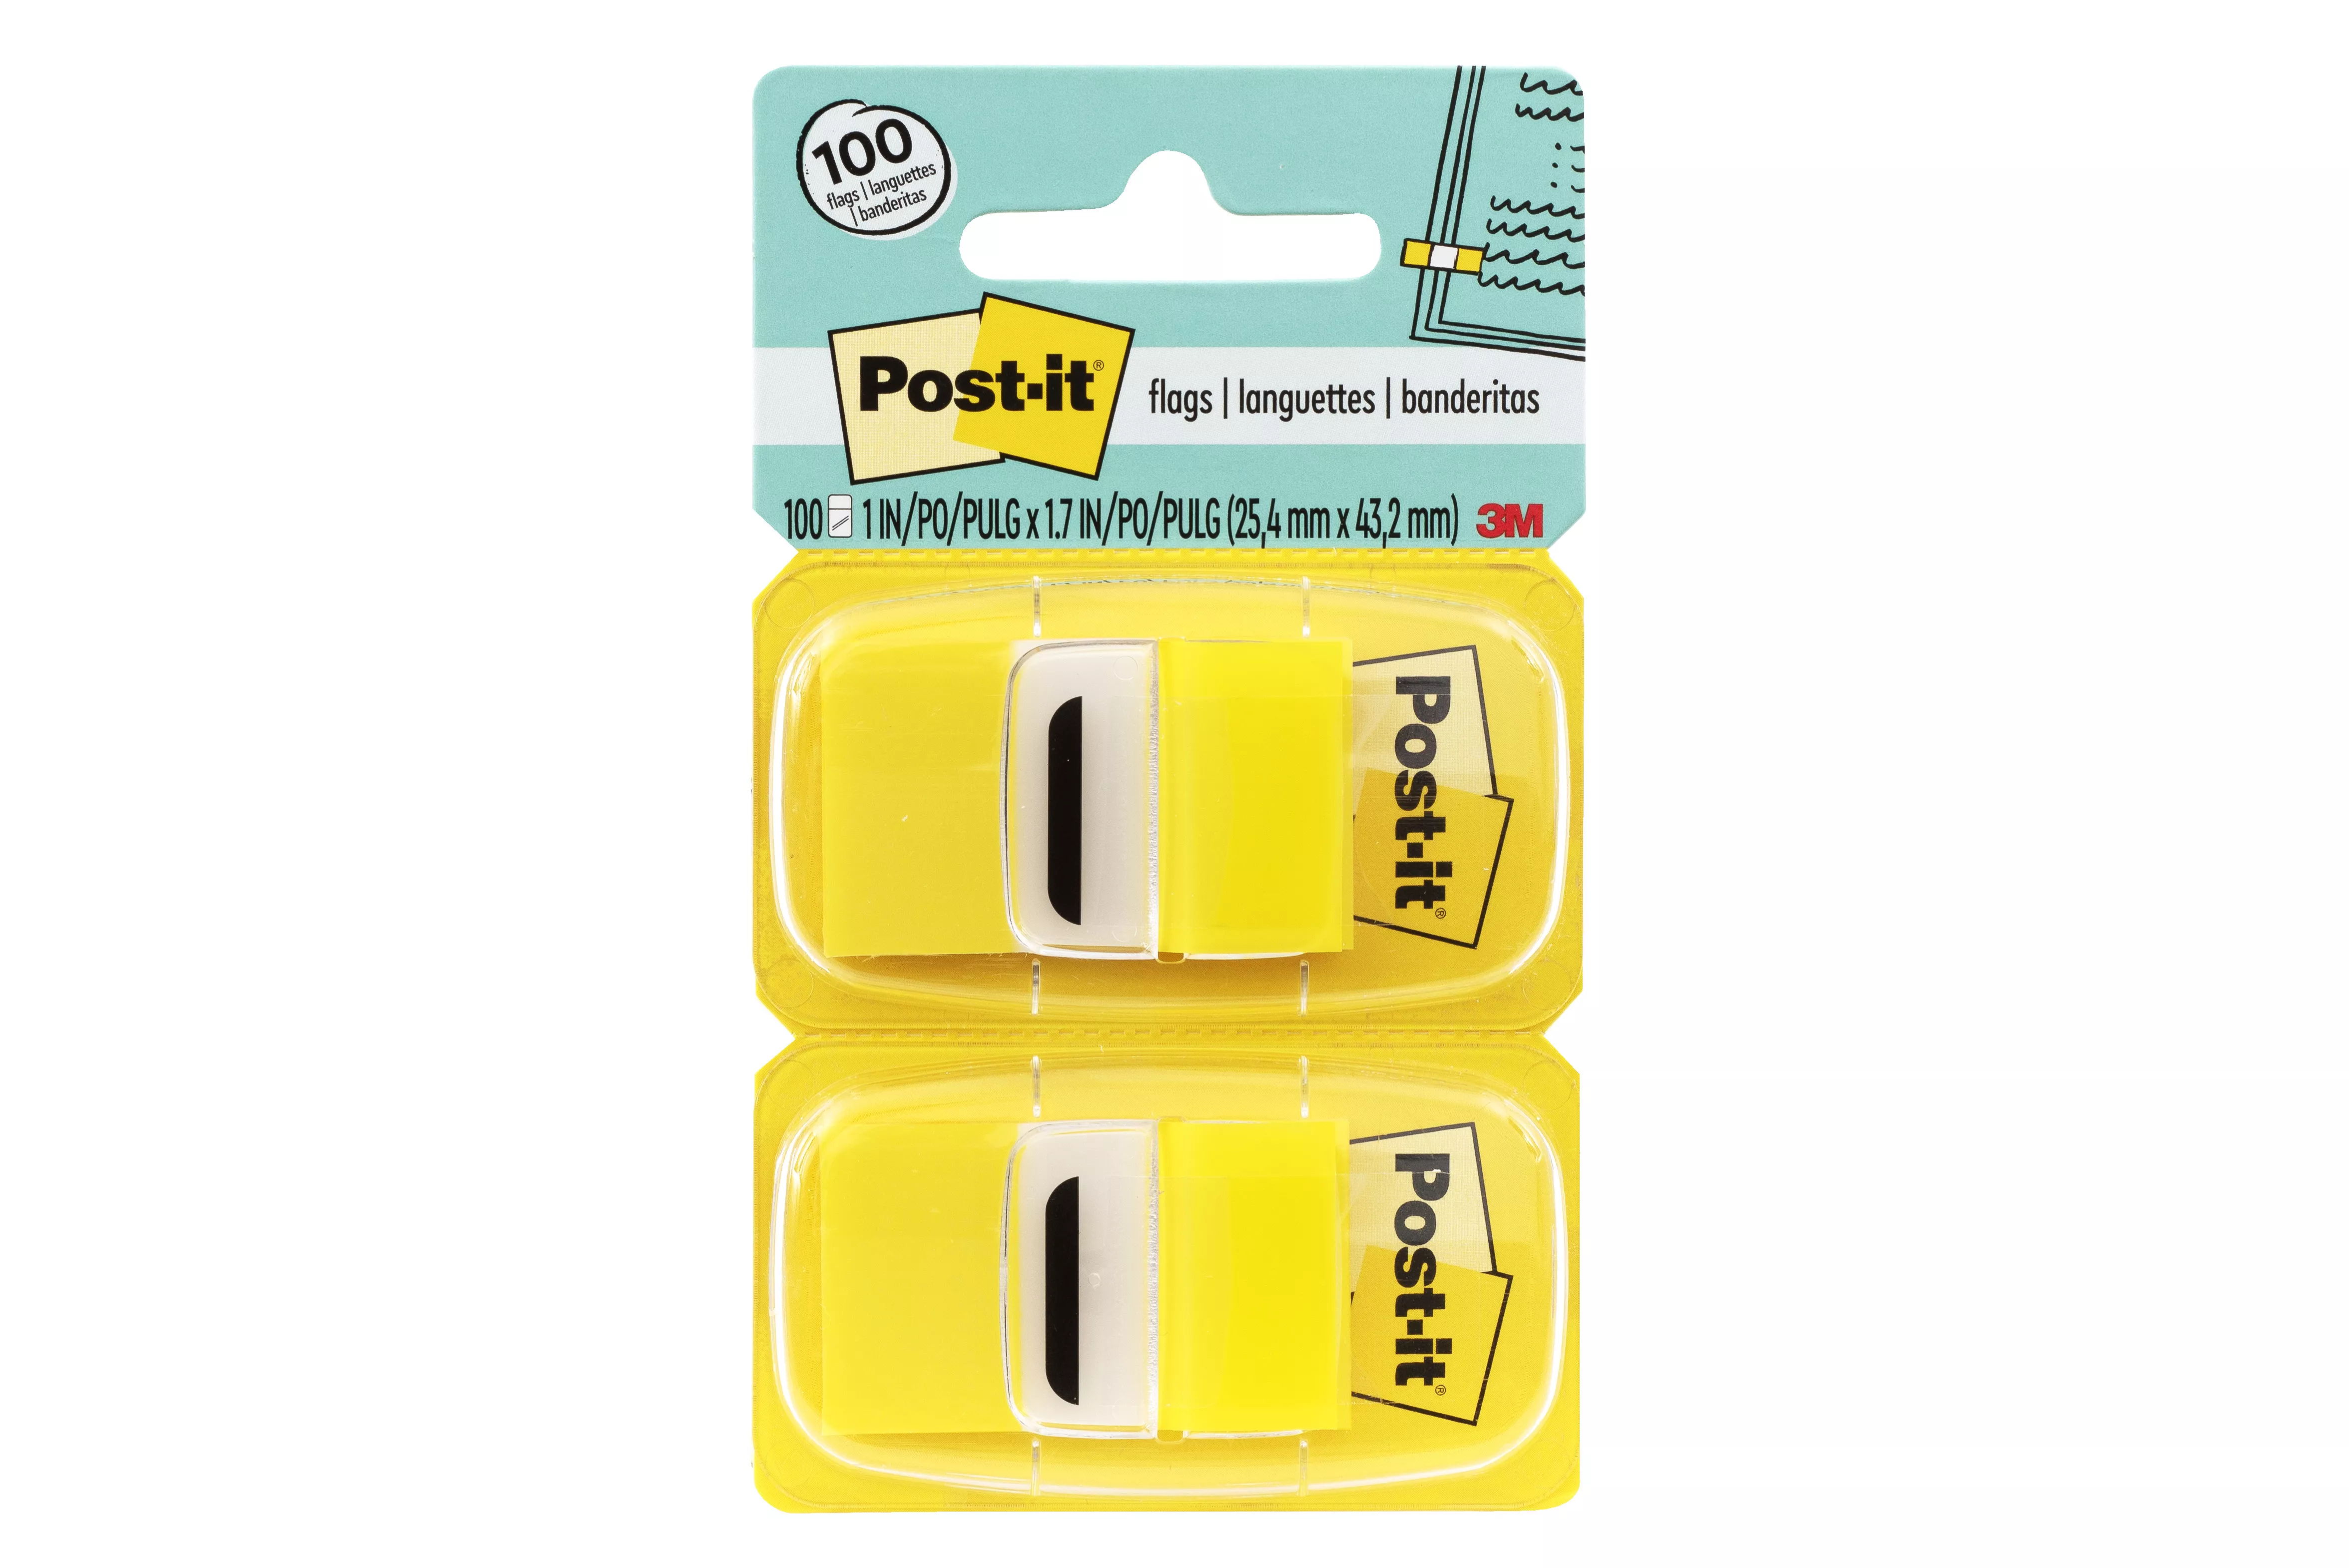 Post-it® Flags 680-YW12, 1 in. x 1.7 in. (25.4 mm x 43.2 mm) Canary
Yellow 12 disp/box 4 bx/cs